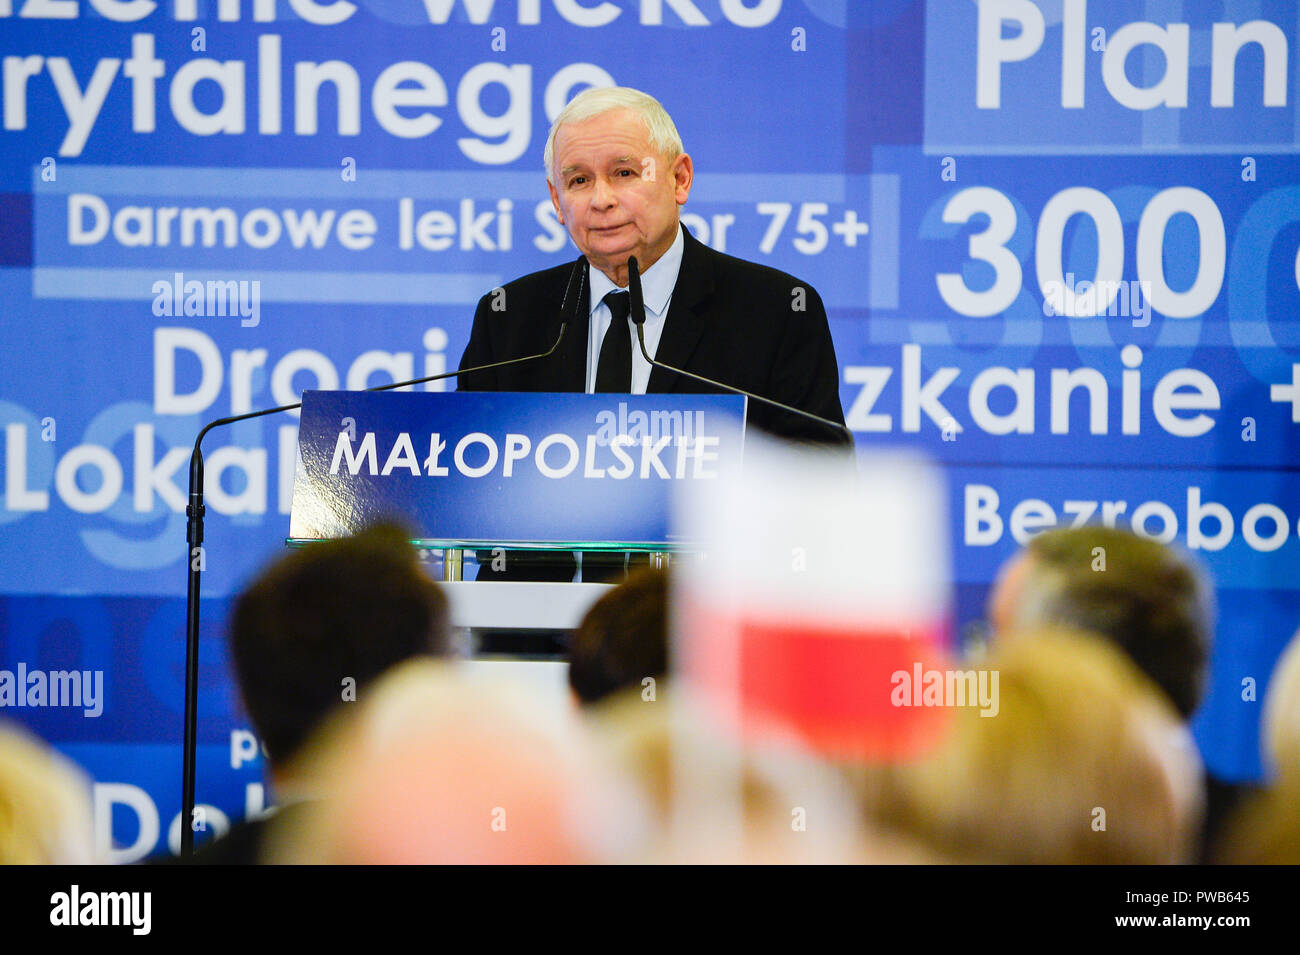 Krakow, Poland. 14th Oct, 2018.  The leader of the Law and Justice party and the most powerful politician in Poland, Jaroslaw Kaczynski speaks during the Law and Justice Convention in Krakow ahead of the local elections at Holiday Inn Hotel. Credit: Omar Marques/SOPA Images/ZUMA Wire/Alamy Live News Credit: ZUMA Press, Inc./Alamy Live News Stock Photo